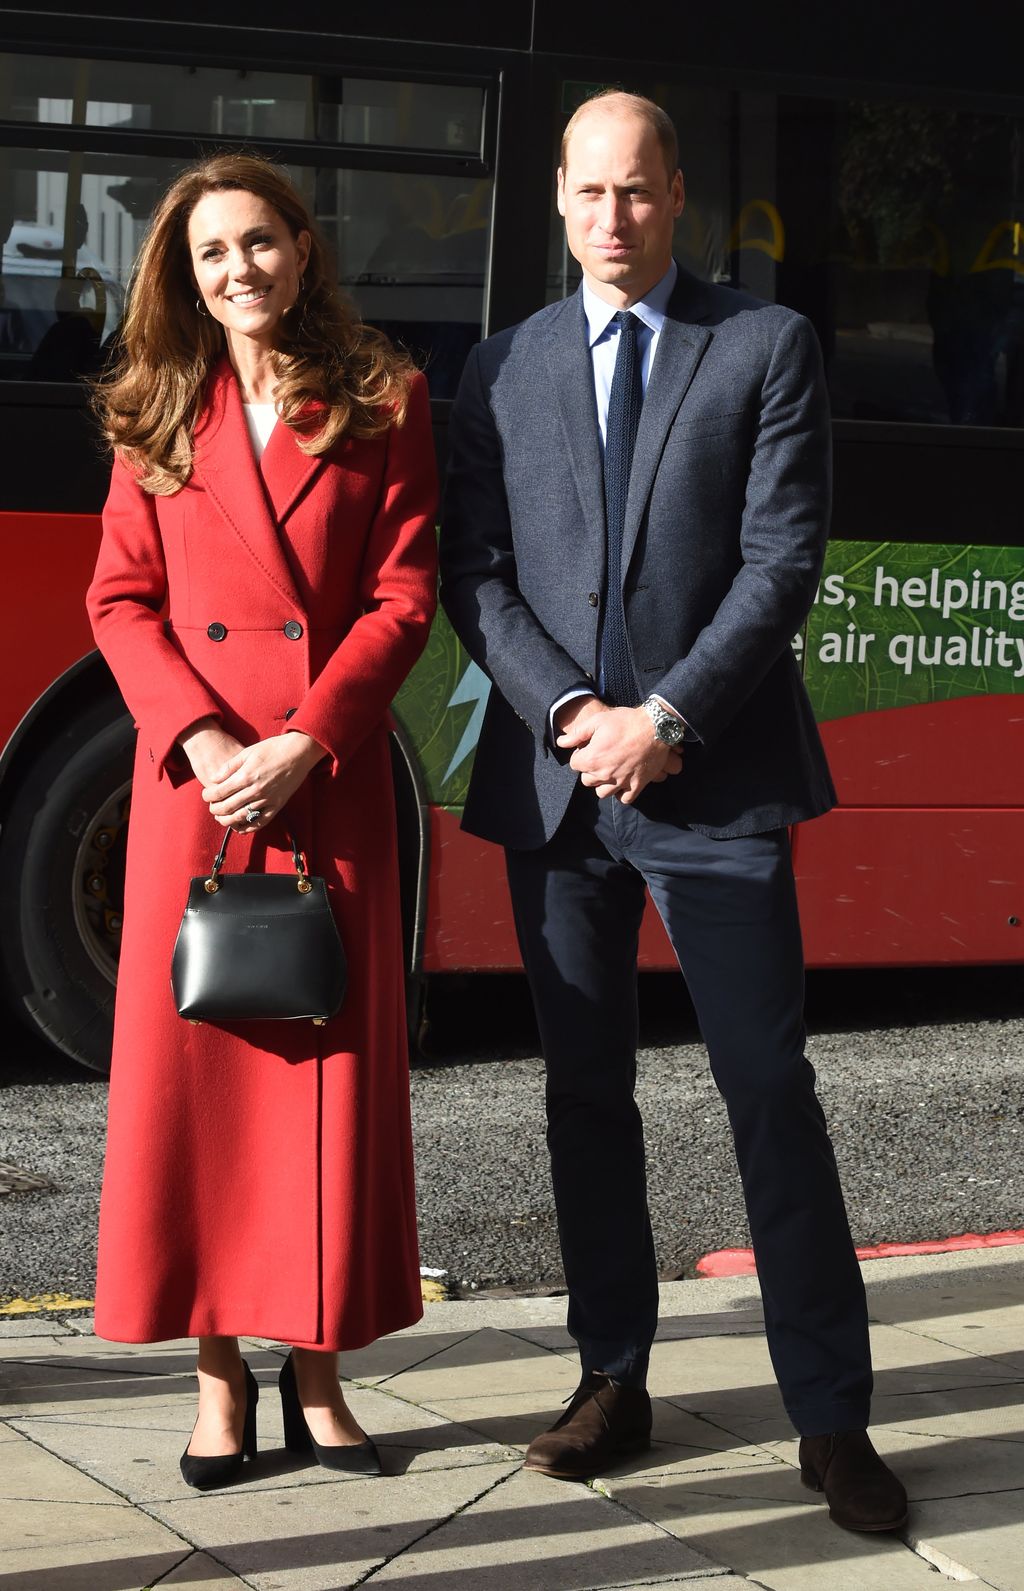 LONDON, ENGLAND - OCTOBER 20: Catherine, Duchess of Cambridge arrives for the launch of the Hold Still campaign at Waterloo Station on October 20, 2020 in London, England. (Photo by Jeremy Selwyn - WPA Pool/Getty Images)